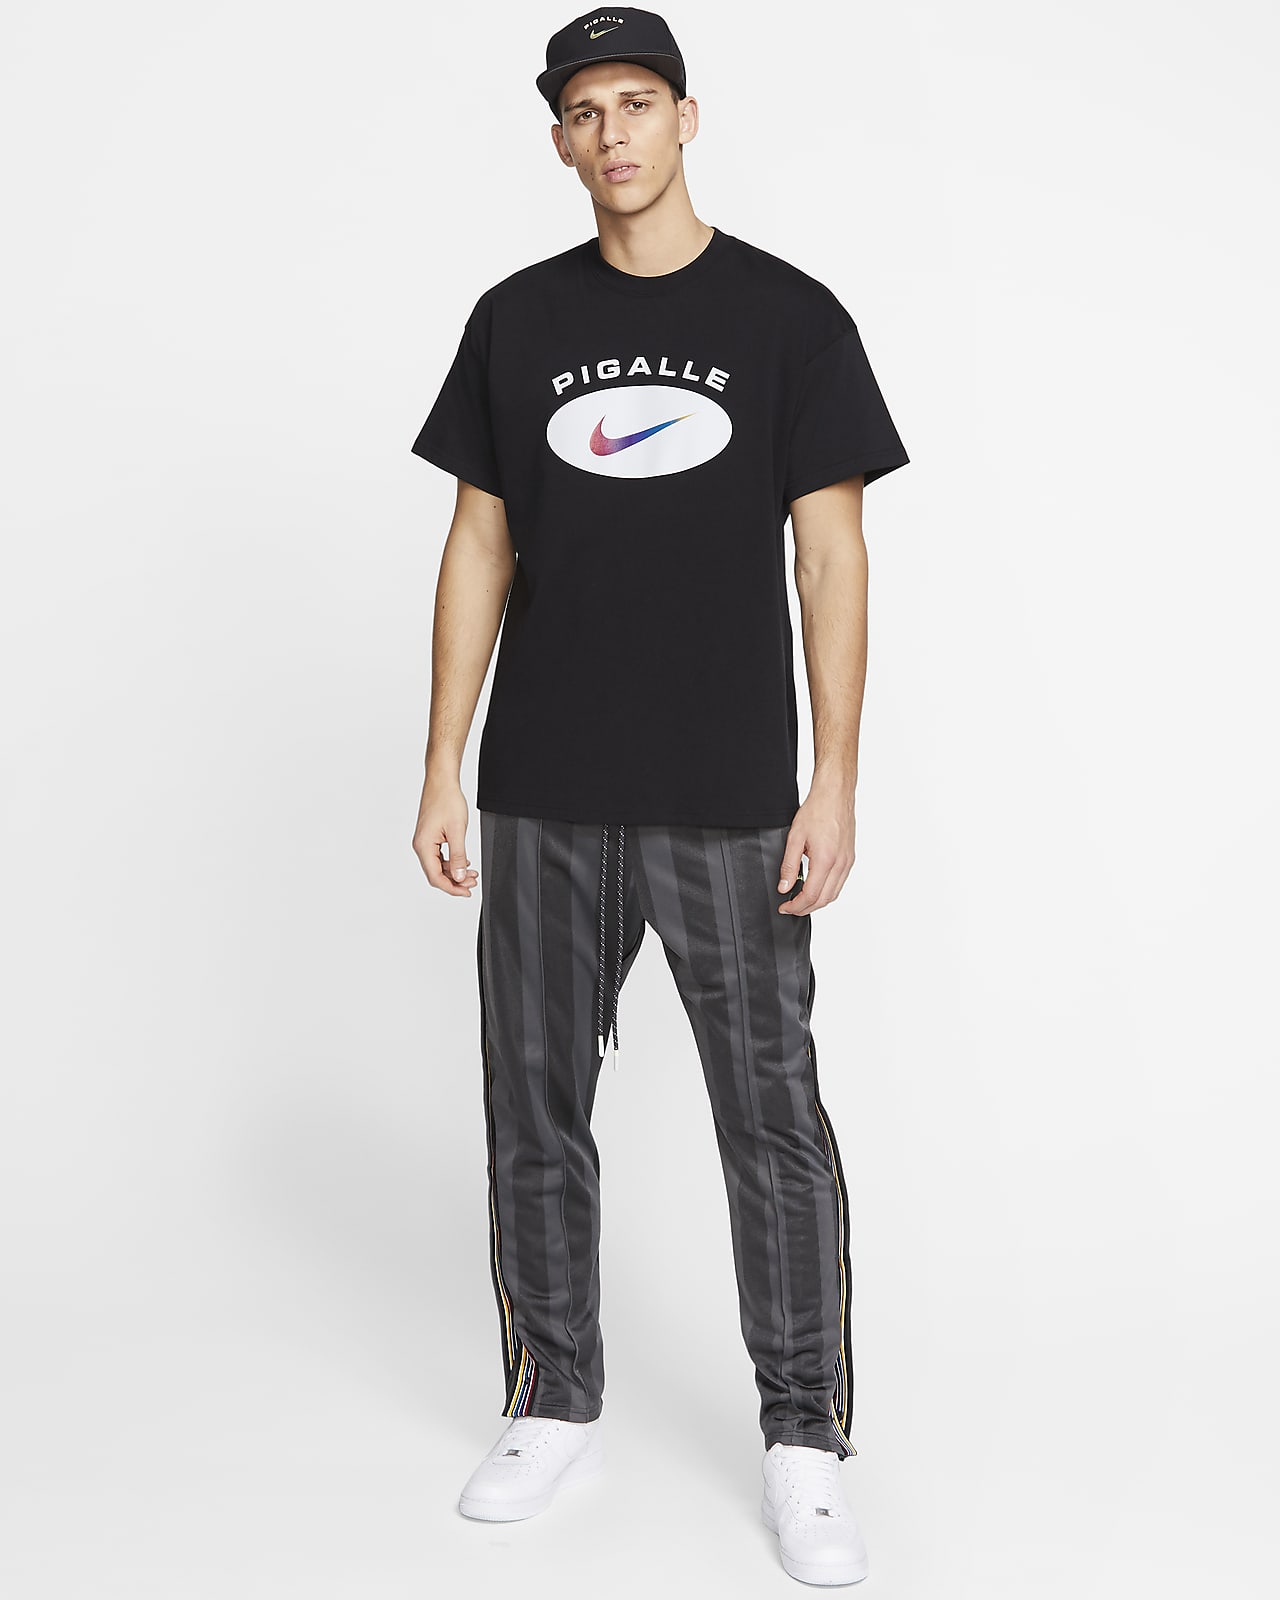 pigalle nike t shirt